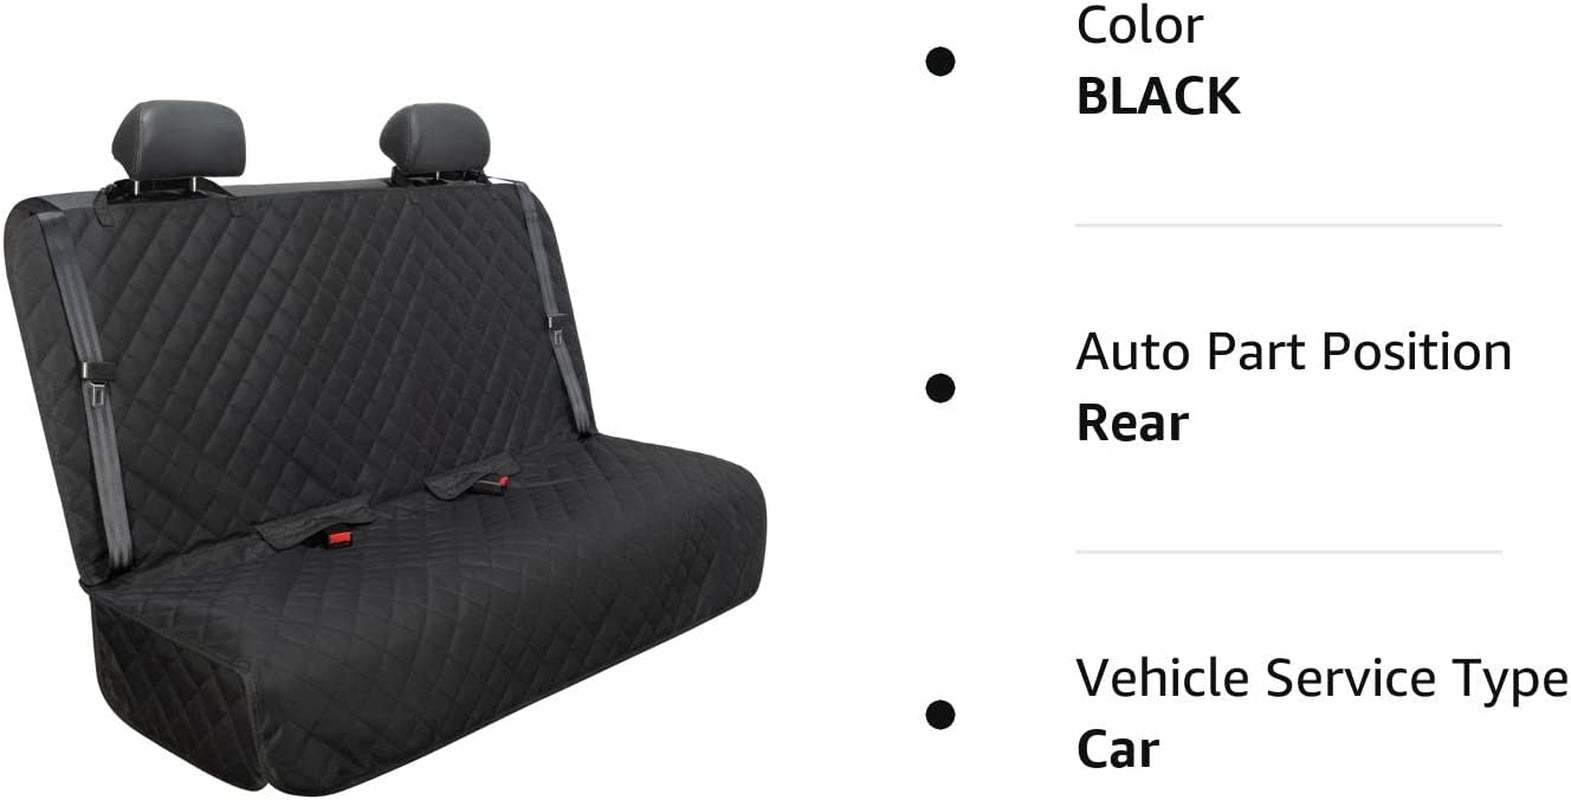 Bench Car Seat Cover - Waterproof, Heavy-Duty and Nonslip Pet Car Seat Protector for Dogs with Universal Size Fits for Trucks & Suvs(Black) - PETGS